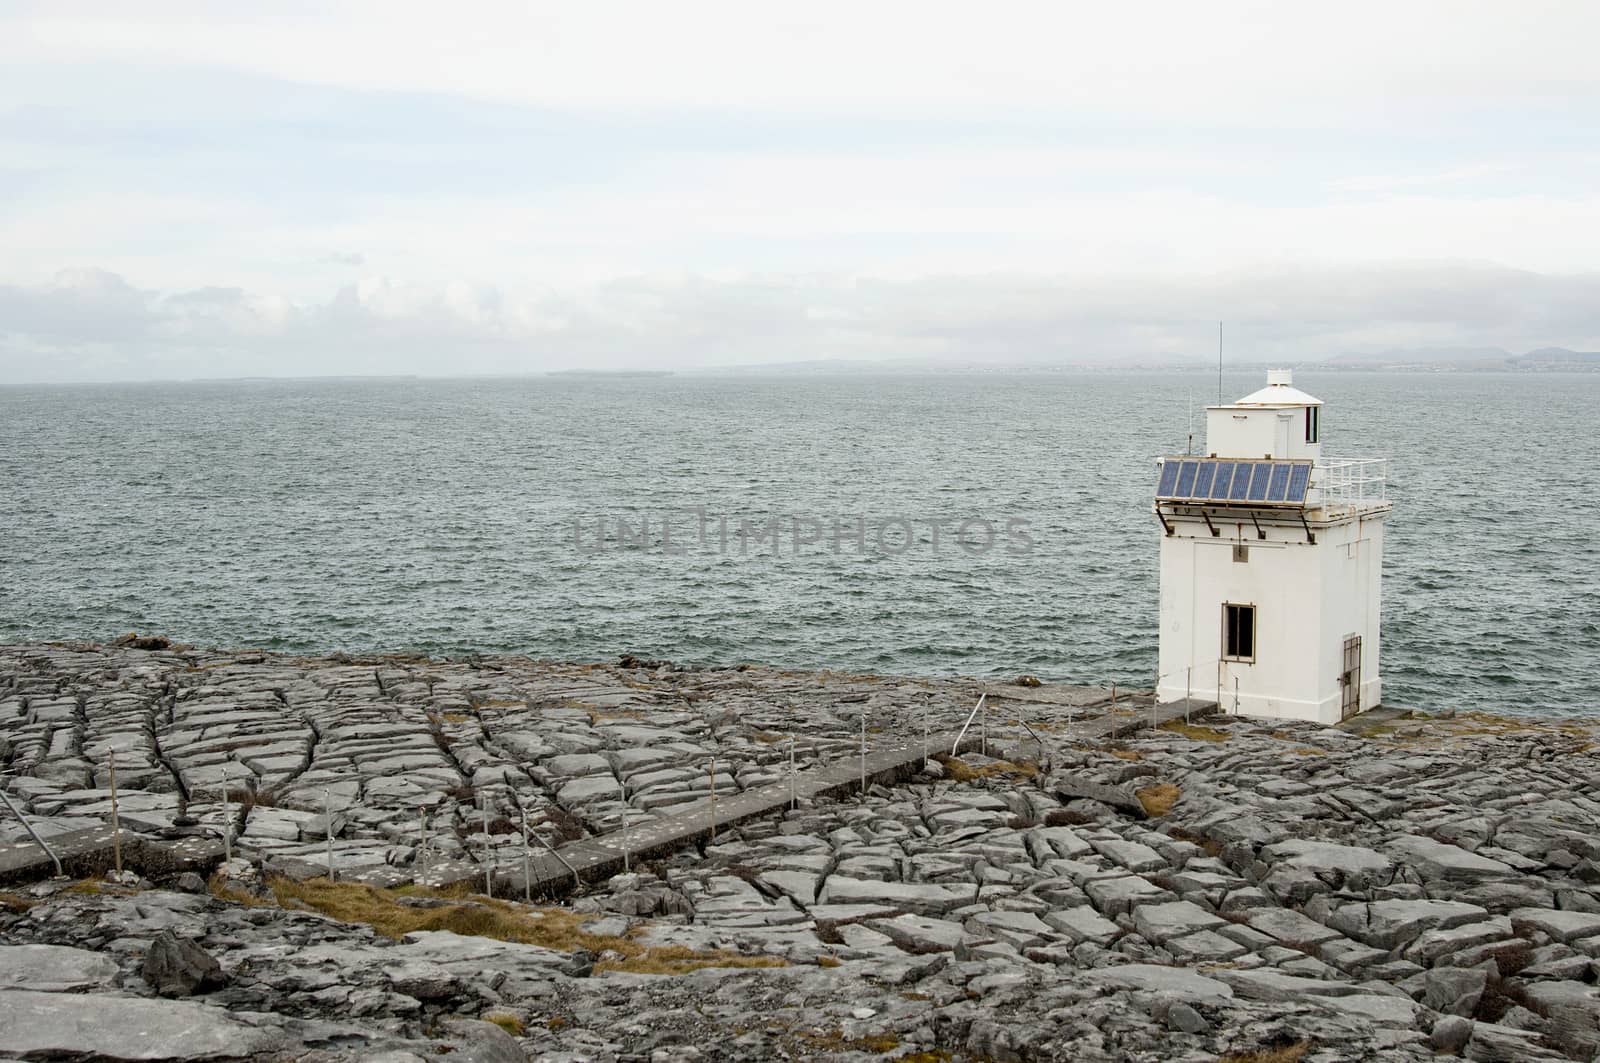 Blackhead lighthouse is a beautiful lighthouse located right on the coast, in the burren, Co. Clare.